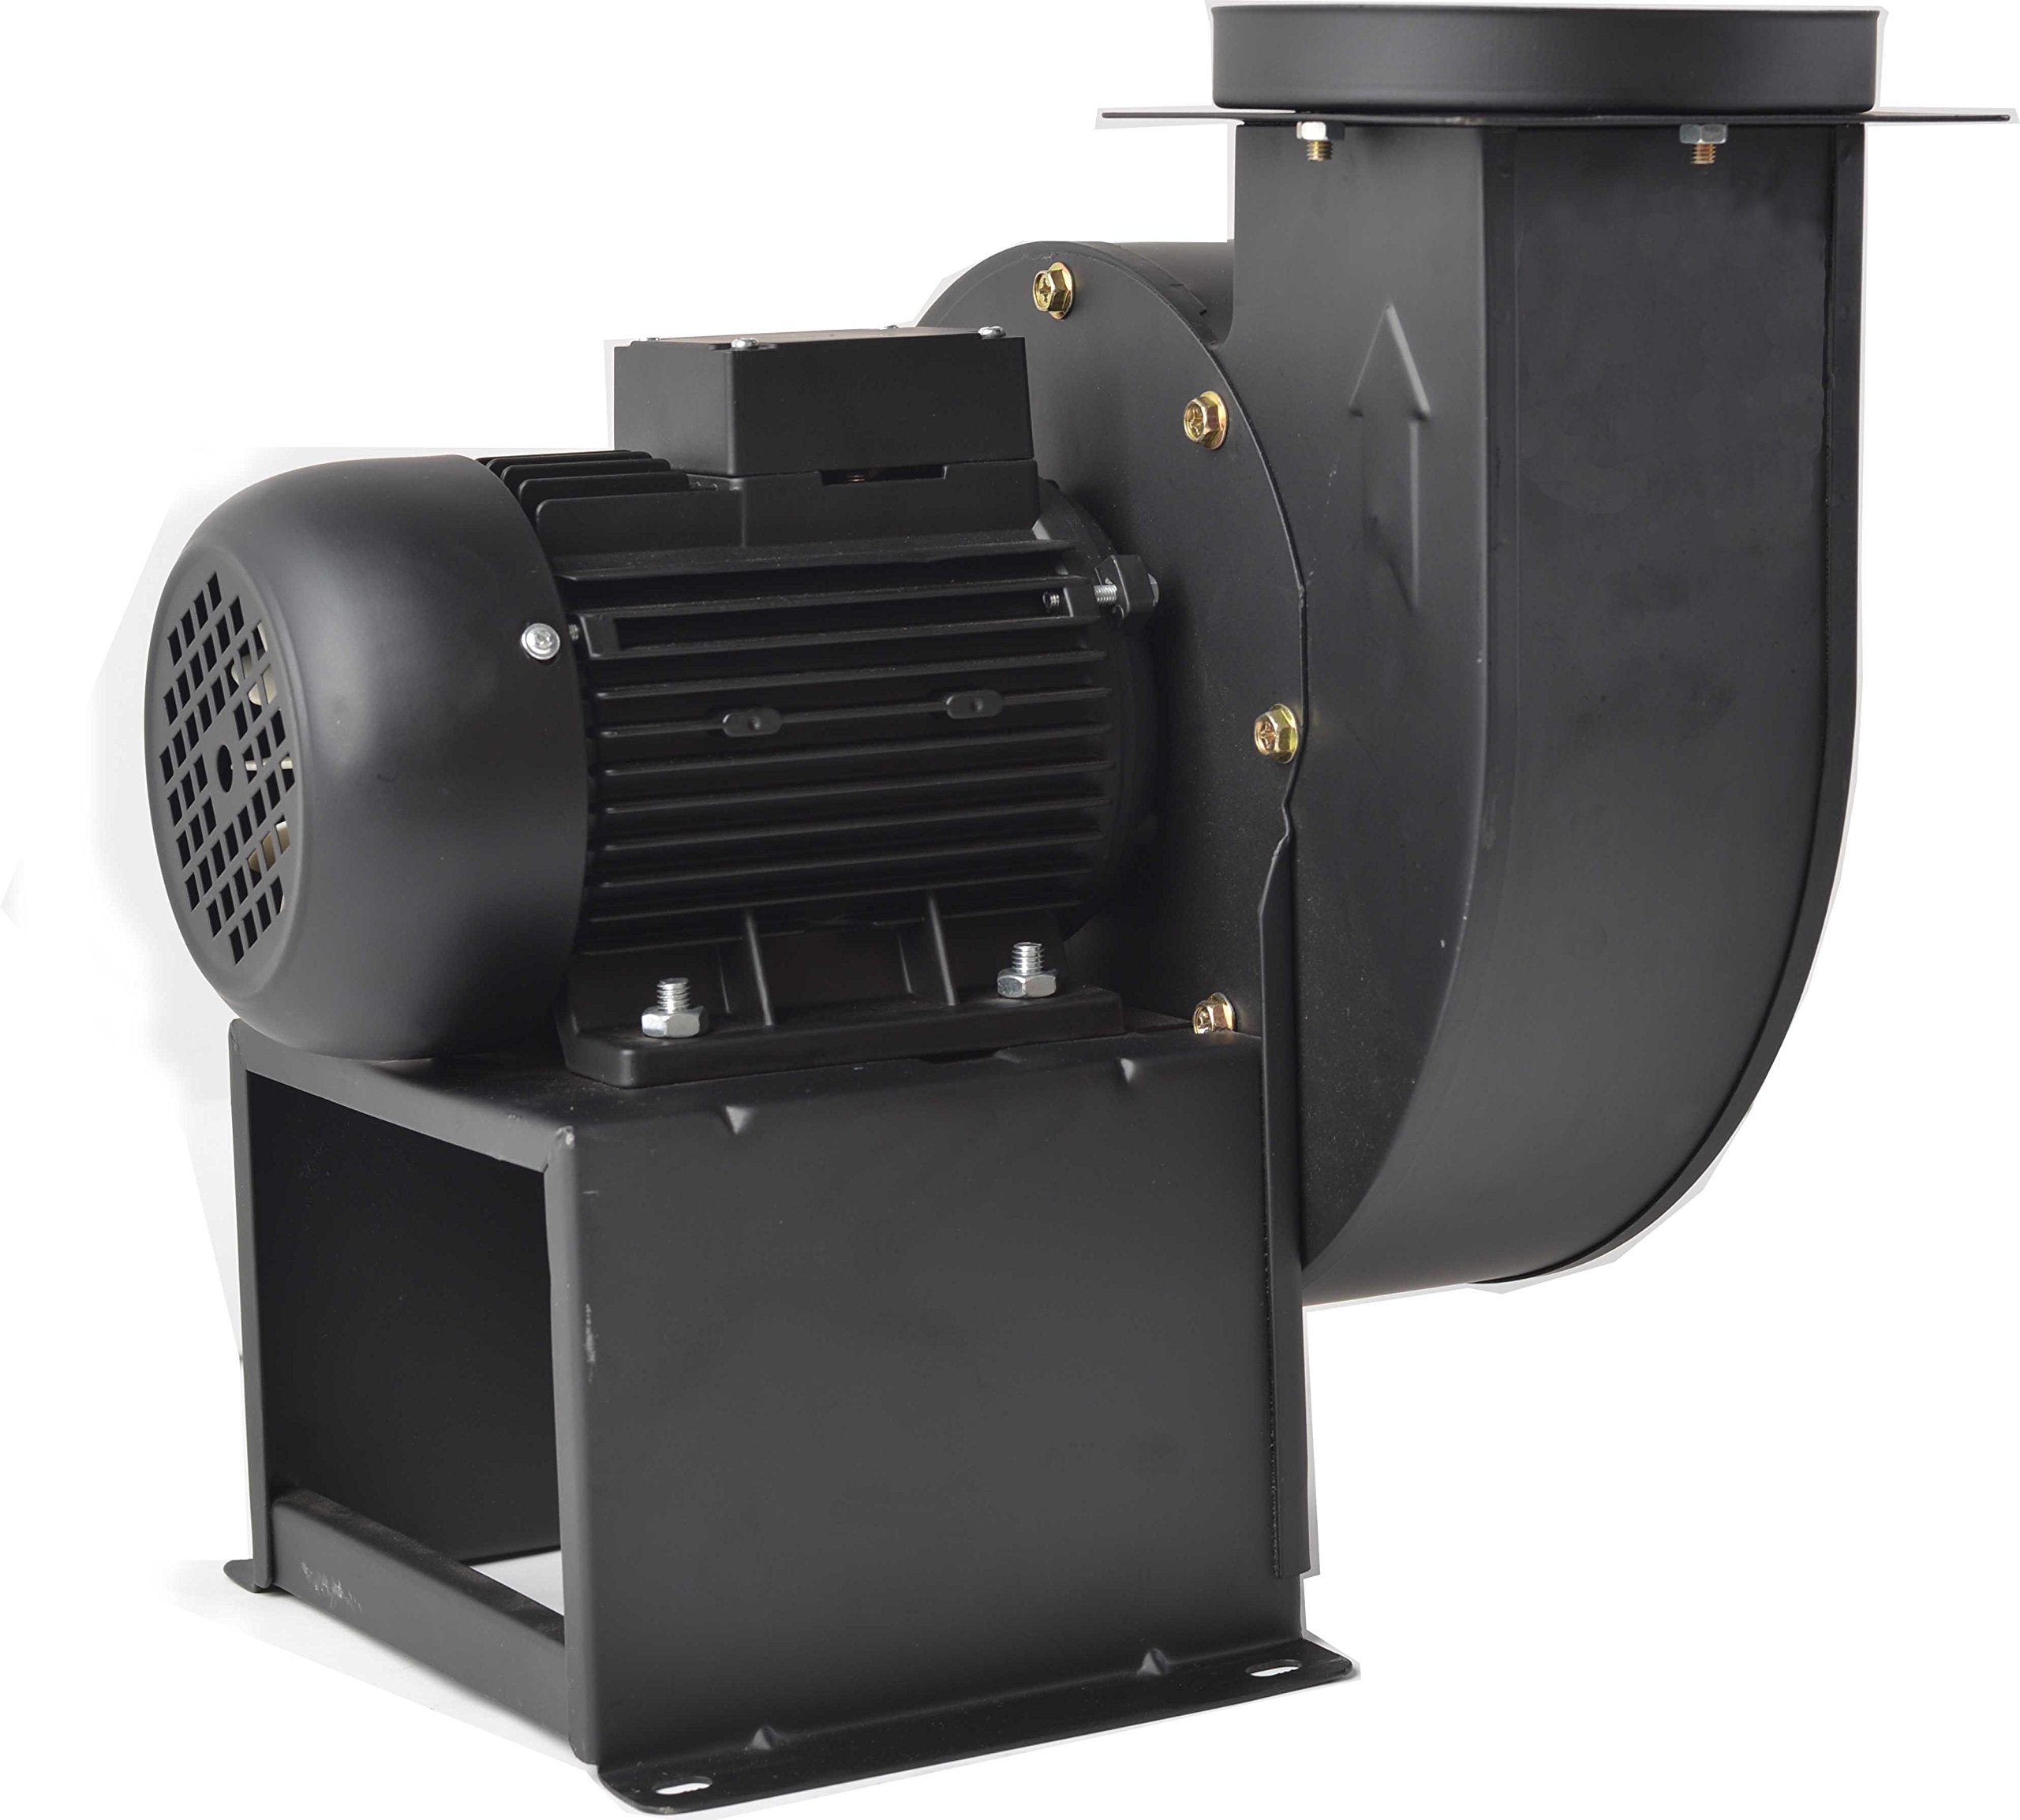 Hakka Centrifugal Blower, Multi-Wing Centrifugal Fan Rectangular Shaded Pole Specialty Blower with Flange, 1400 M2/H Air Flow, 500 CFM, 3300 RPM, 110V/60Hz, 11 amps